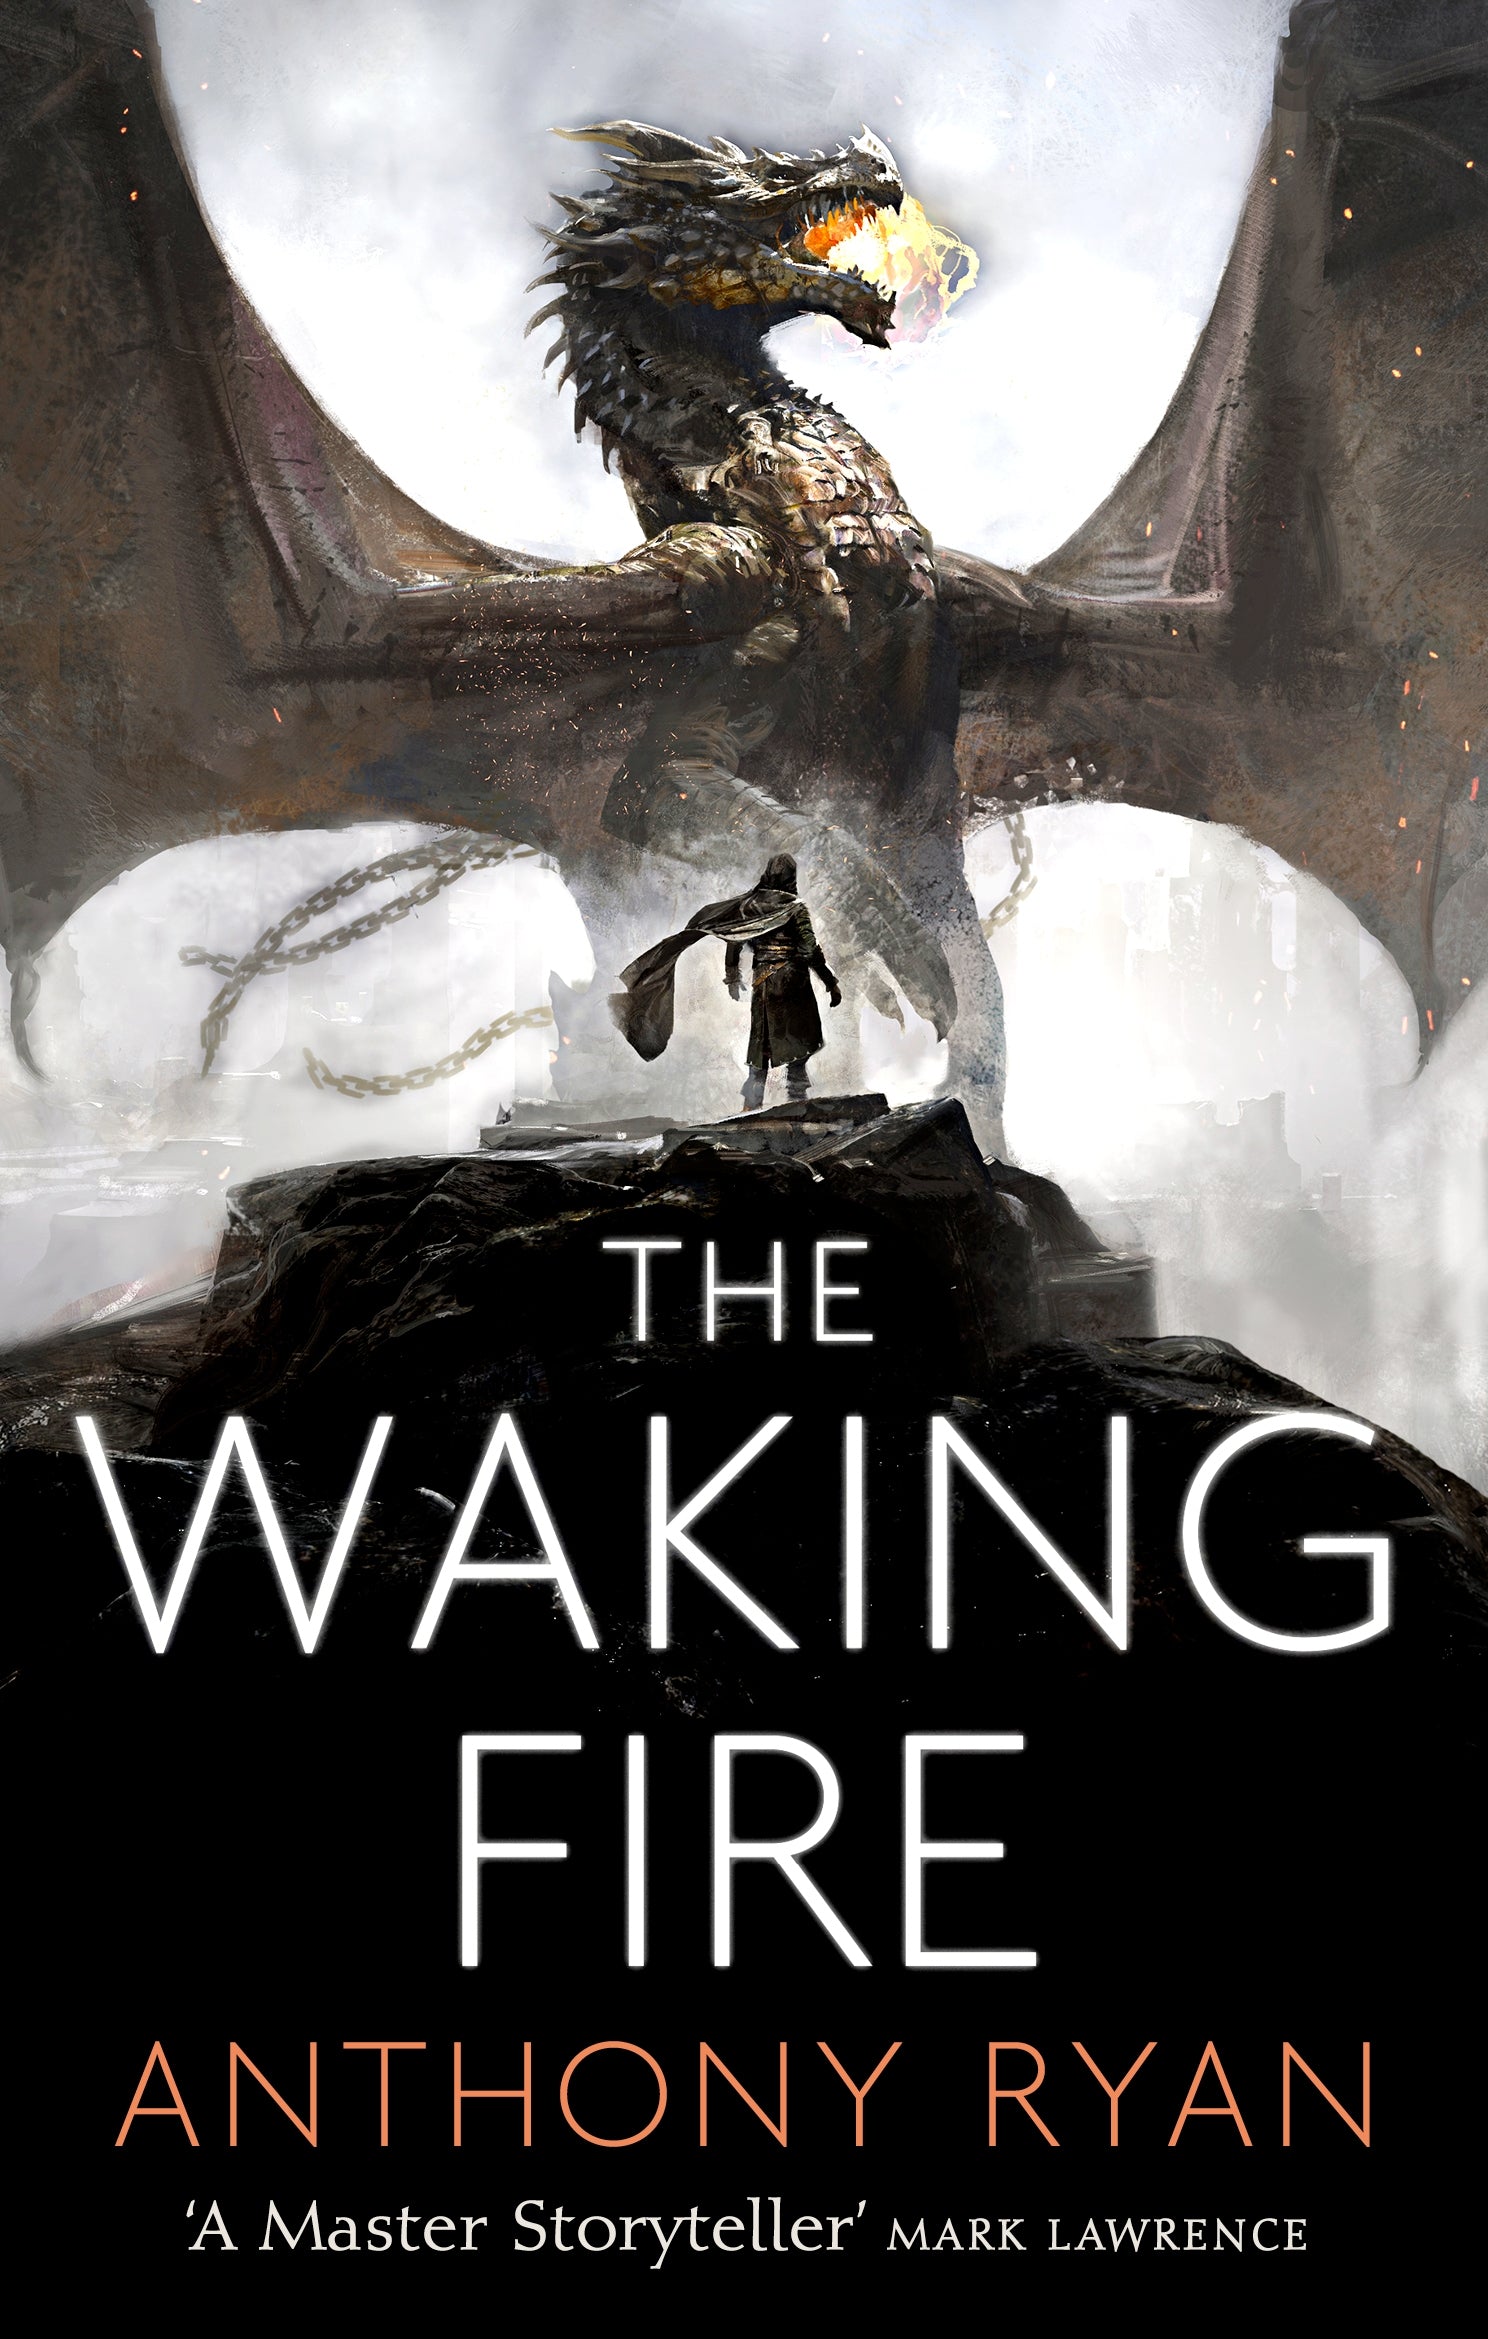 The Waking Fire by Anthony Ryan